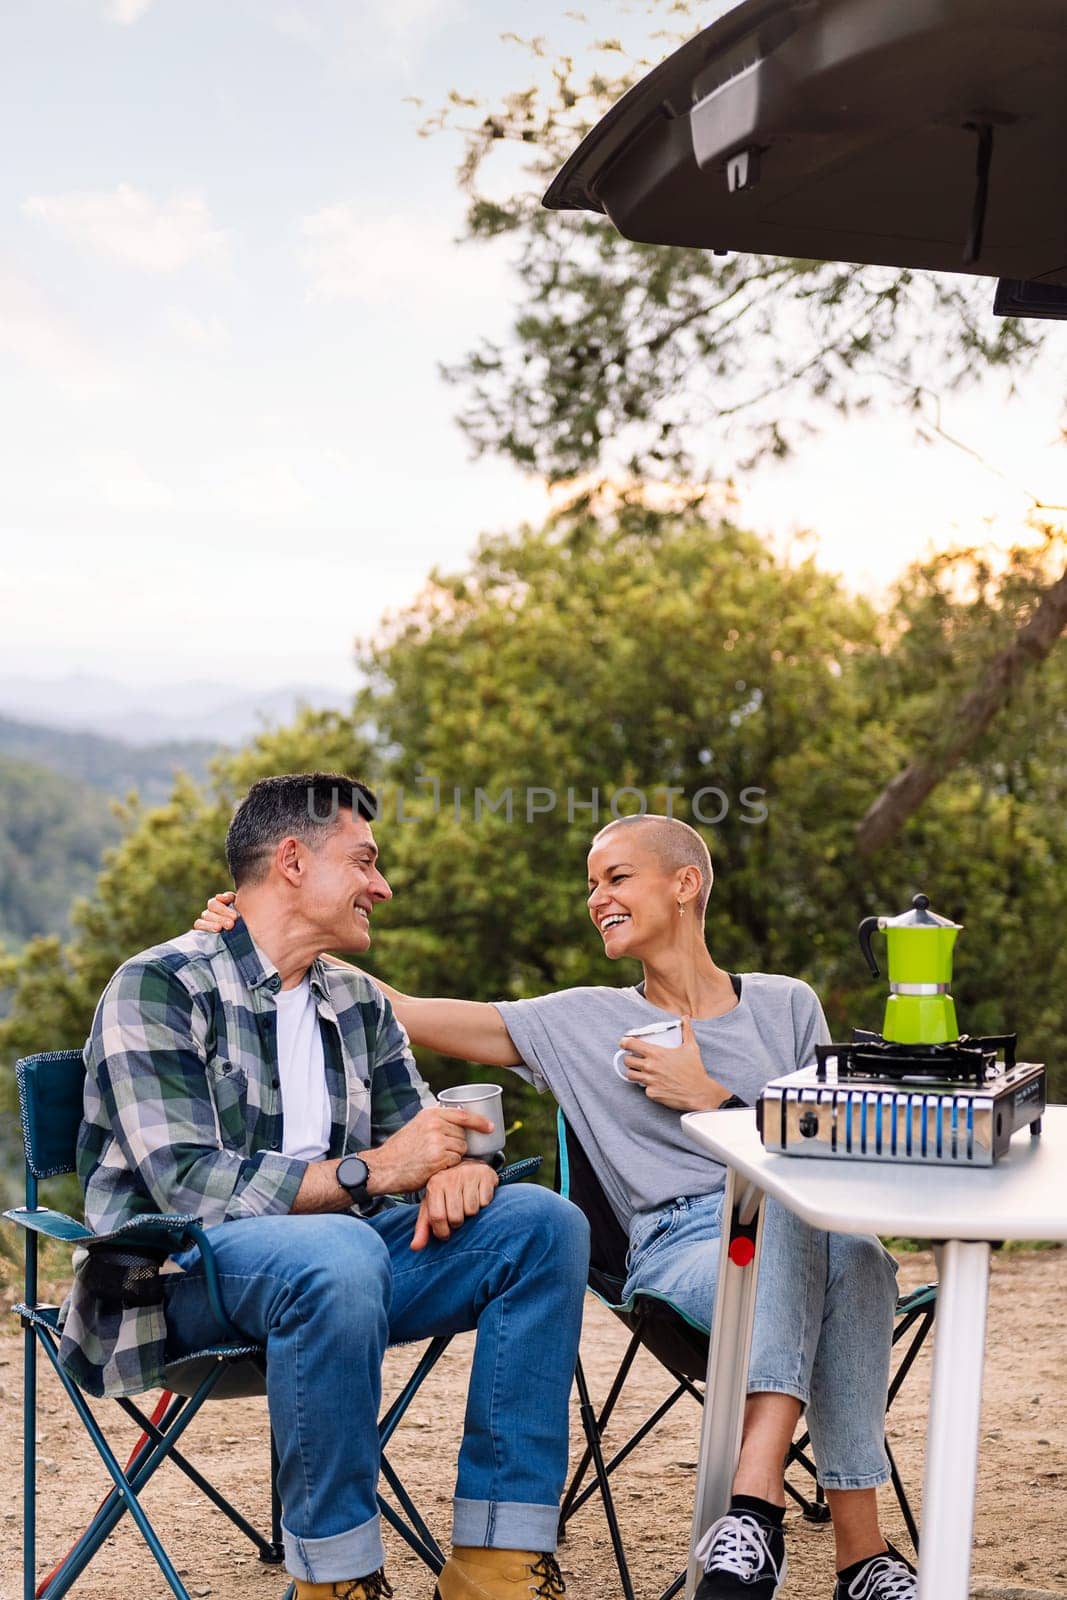 happy couple laughing while having coffee in the countryside, concept of active tourism in nature and outdoor activities, copy space for text